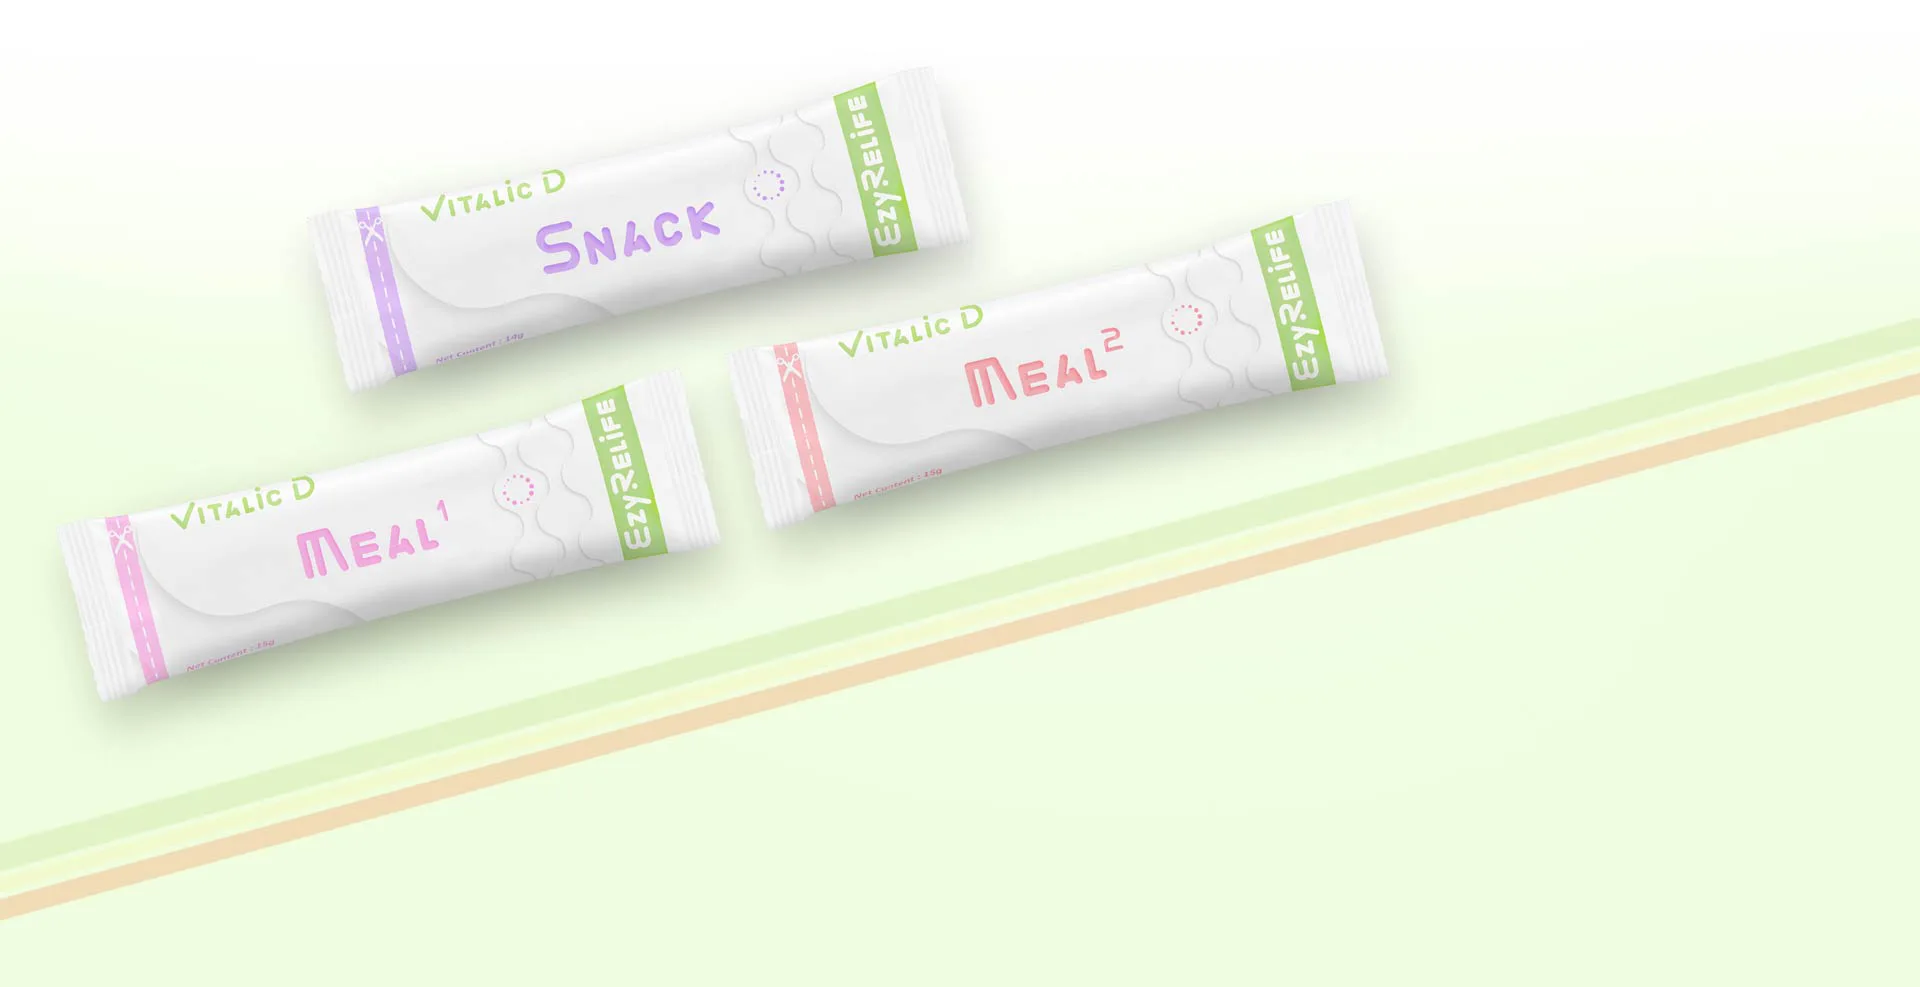 Vitalic D with natural balanced nutritious meals & snack sachets that formulated to minimize burden on organs while detoxing